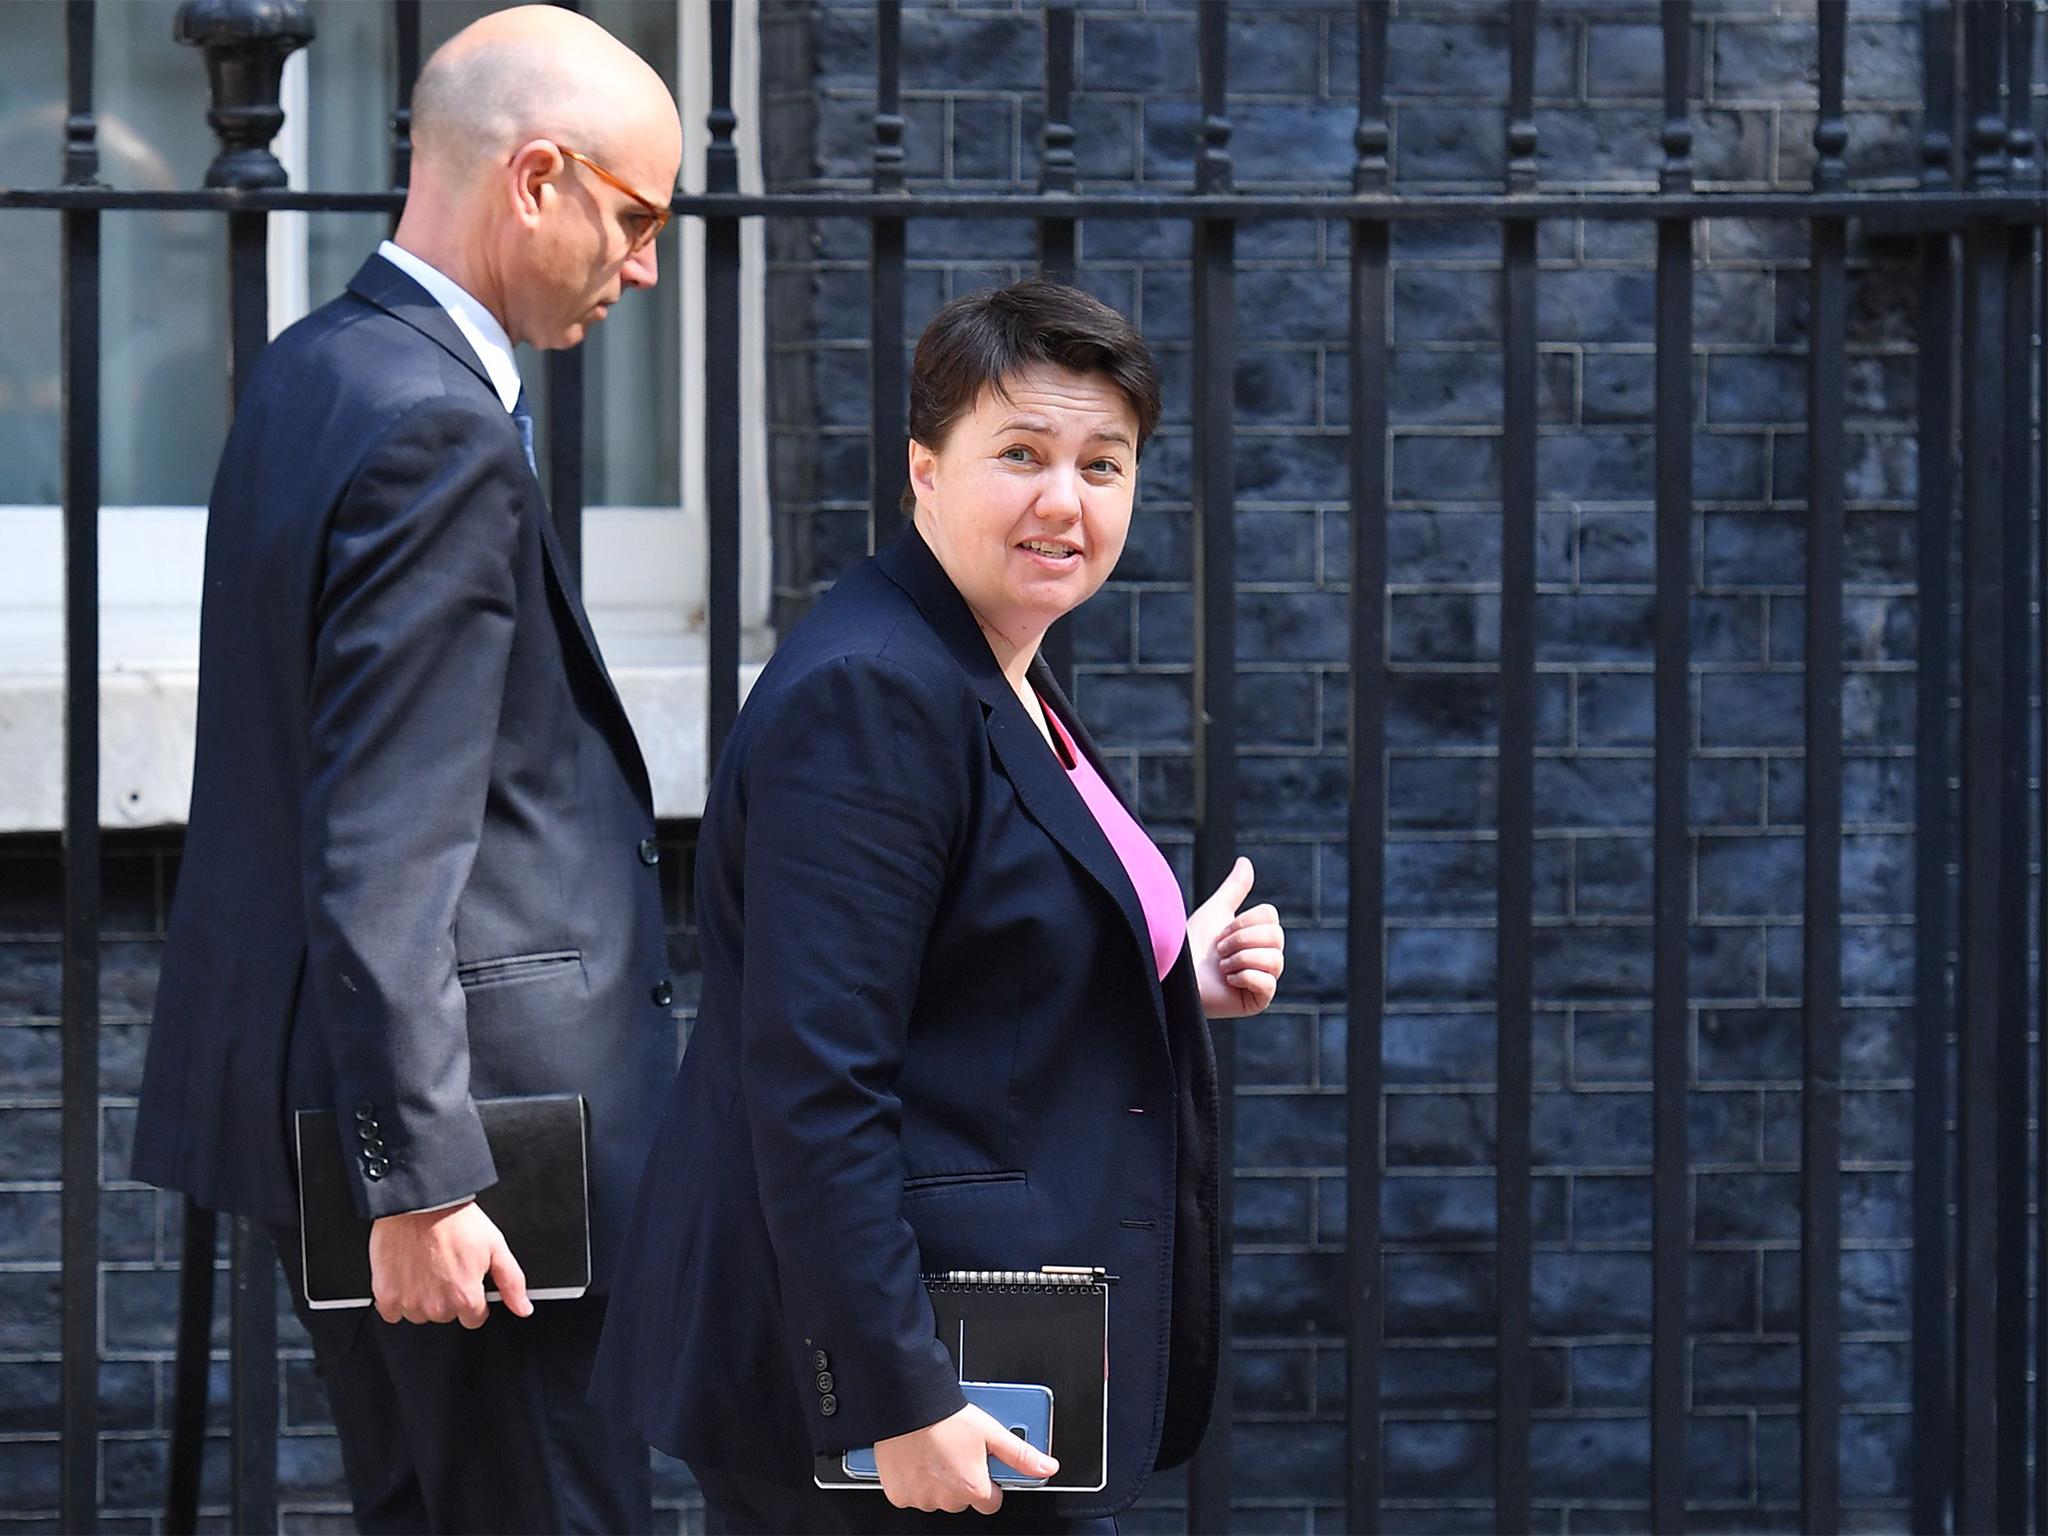 Davidson is professionally unusual, to put it mildly, in other ways: she is raising a family when she has a viable path to Downing Street